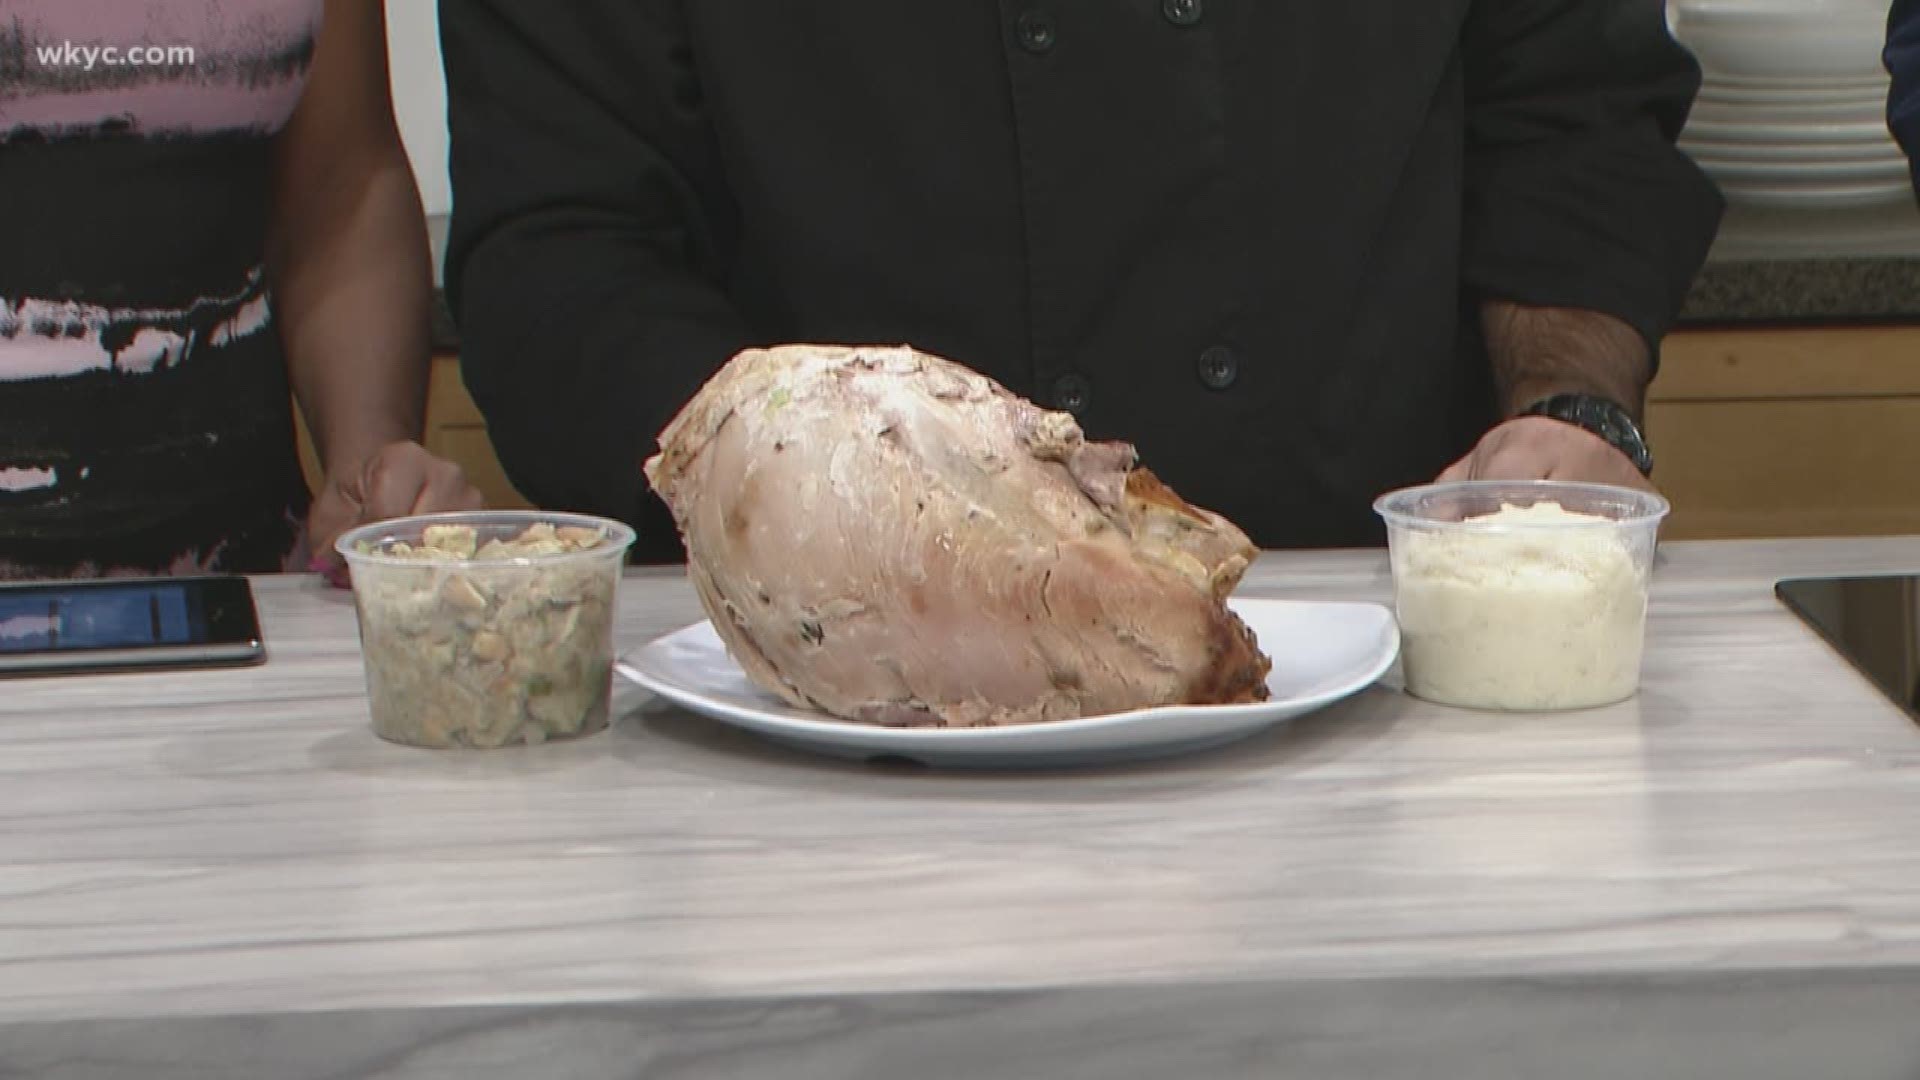 Nov. 23, 2018: Here is the best way to reheat your leftover Thanksgiving turkey.